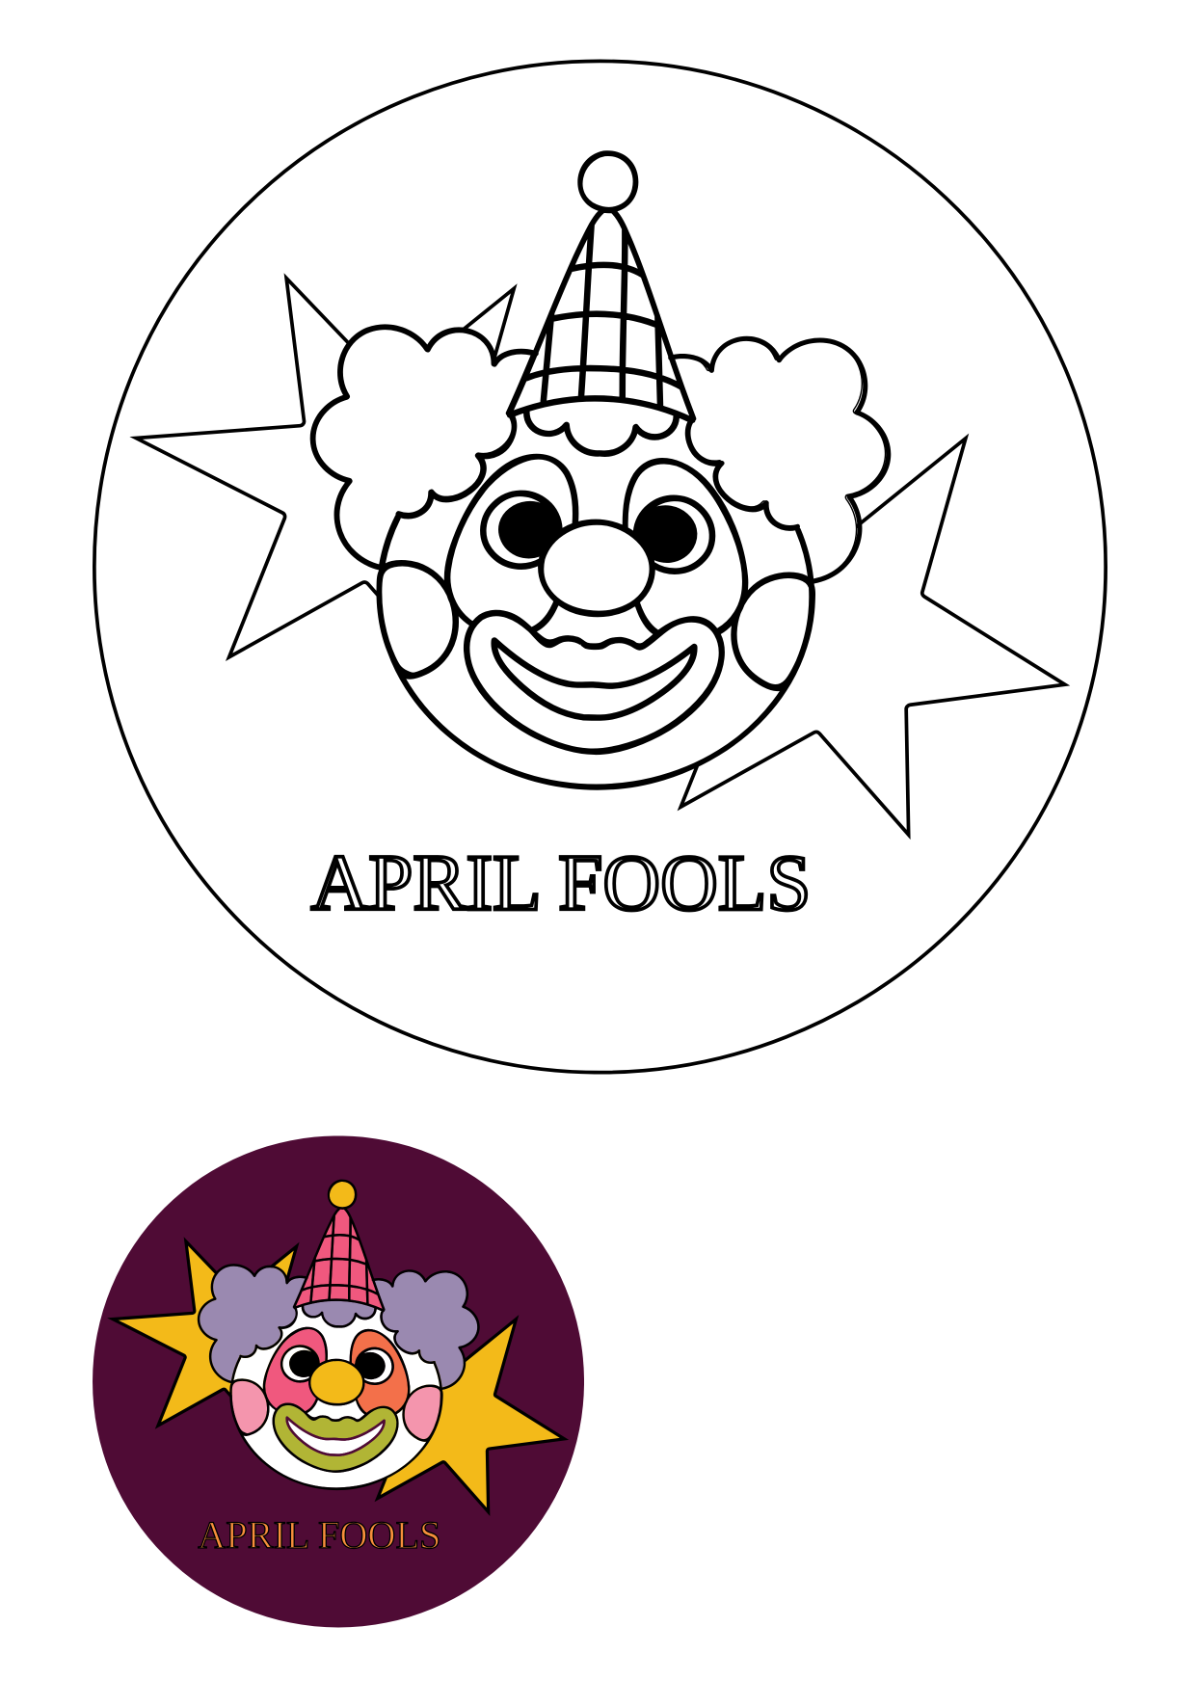 Easy April Fools’ Day Coloring Page Template